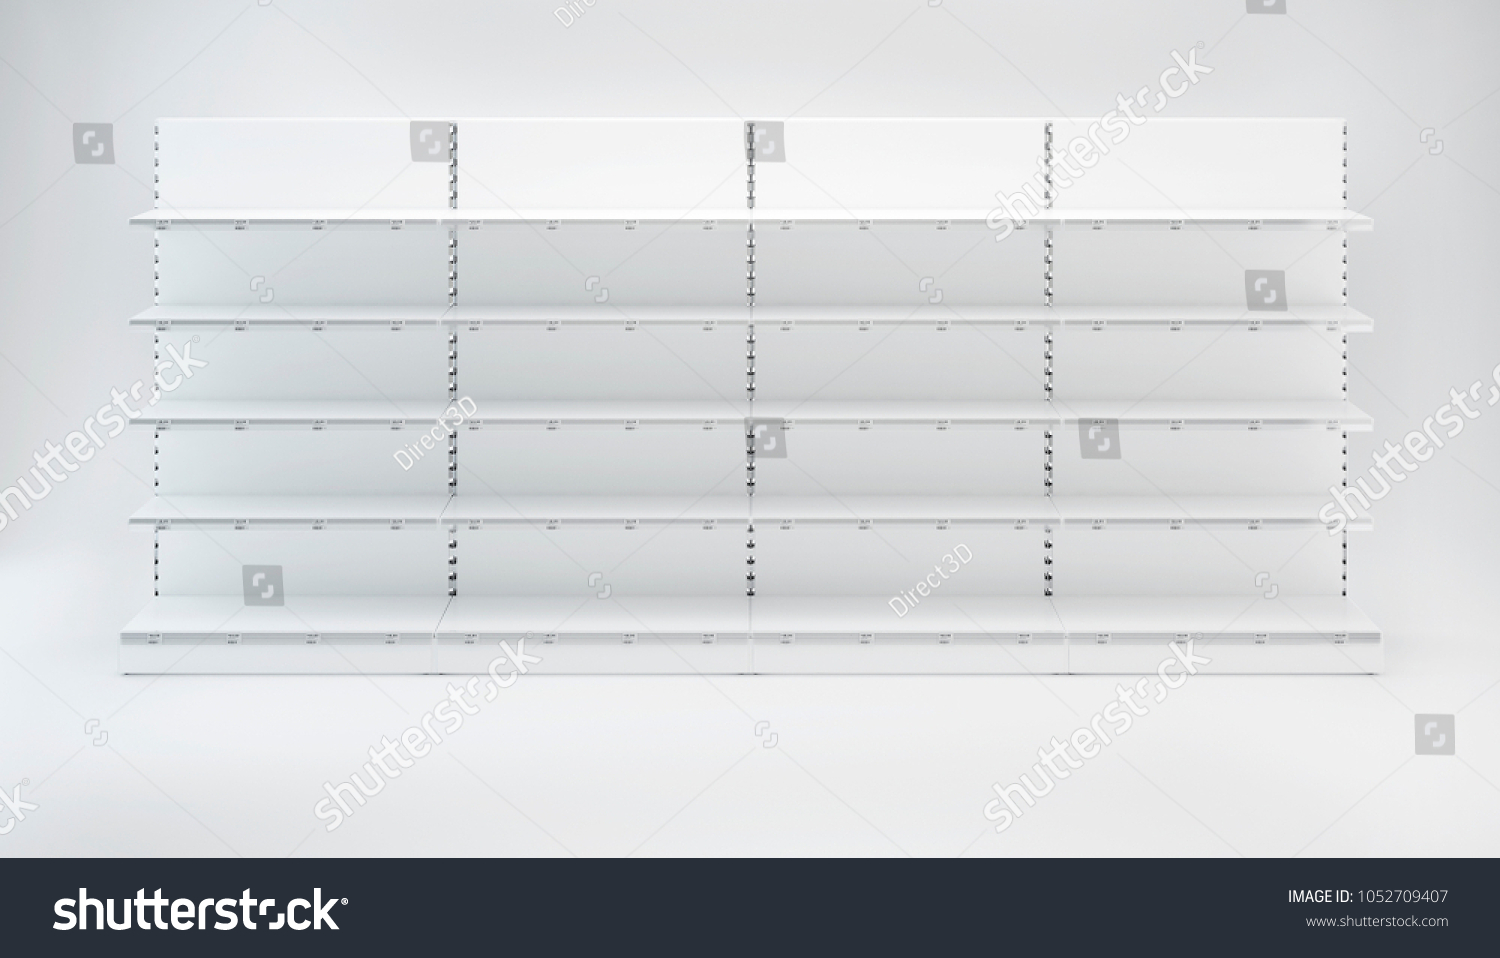 Four Supermarket Showcase Displays with Shelves staying in front view in the row on white background #1052709407